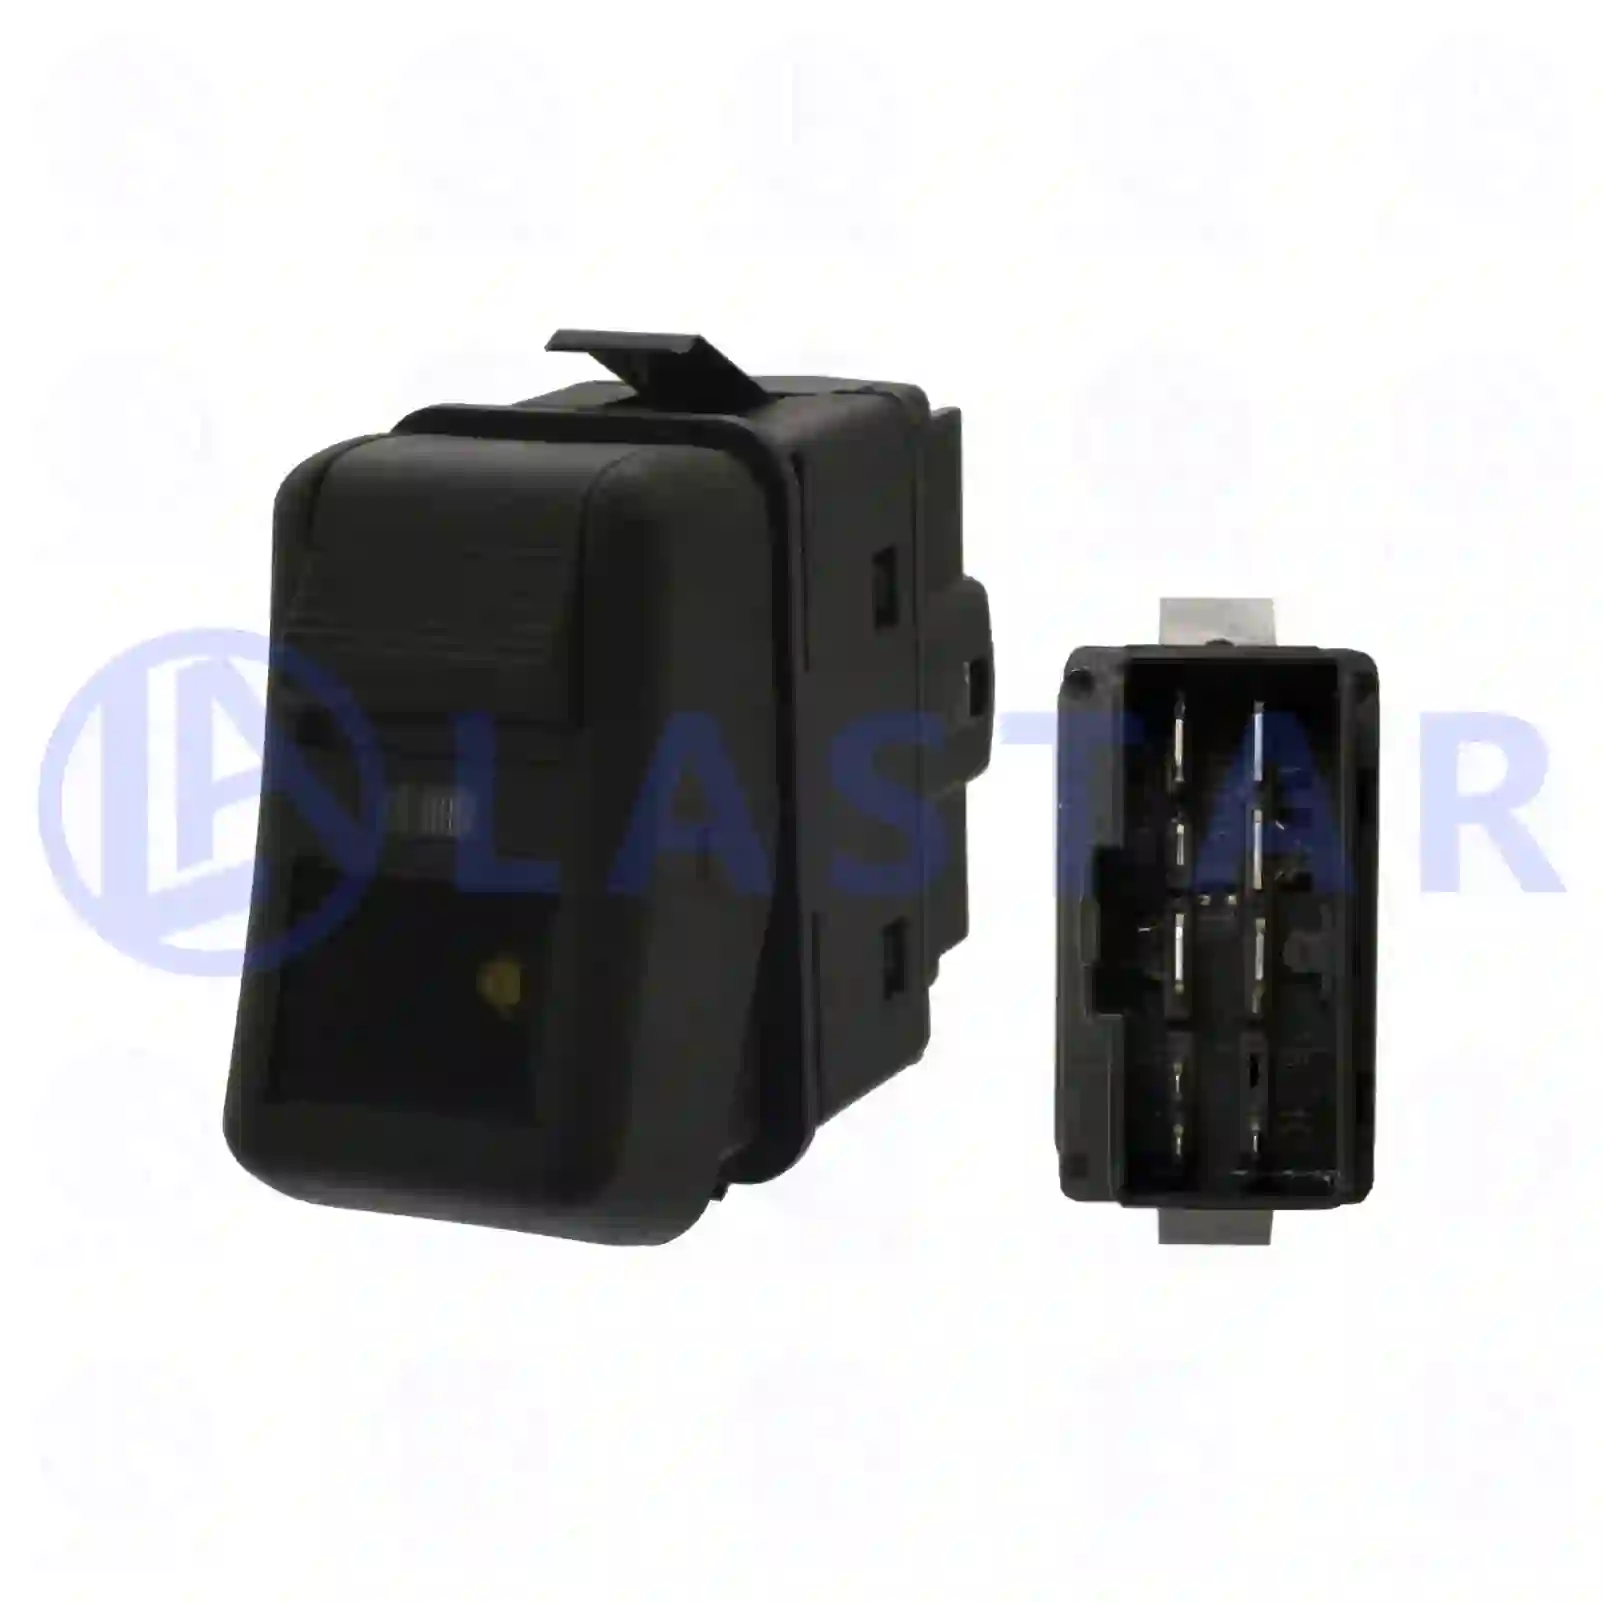 Switch, 77711201, 1077938, ZG20174-0008 ||  77711201 Lastar Spare Part | Truck Spare Parts, Auotomotive Spare Parts Switch, 77711201, 1077938, ZG20174-0008 ||  77711201 Lastar Spare Part | Truck Spare Parts, Auotomotive Spare Parts